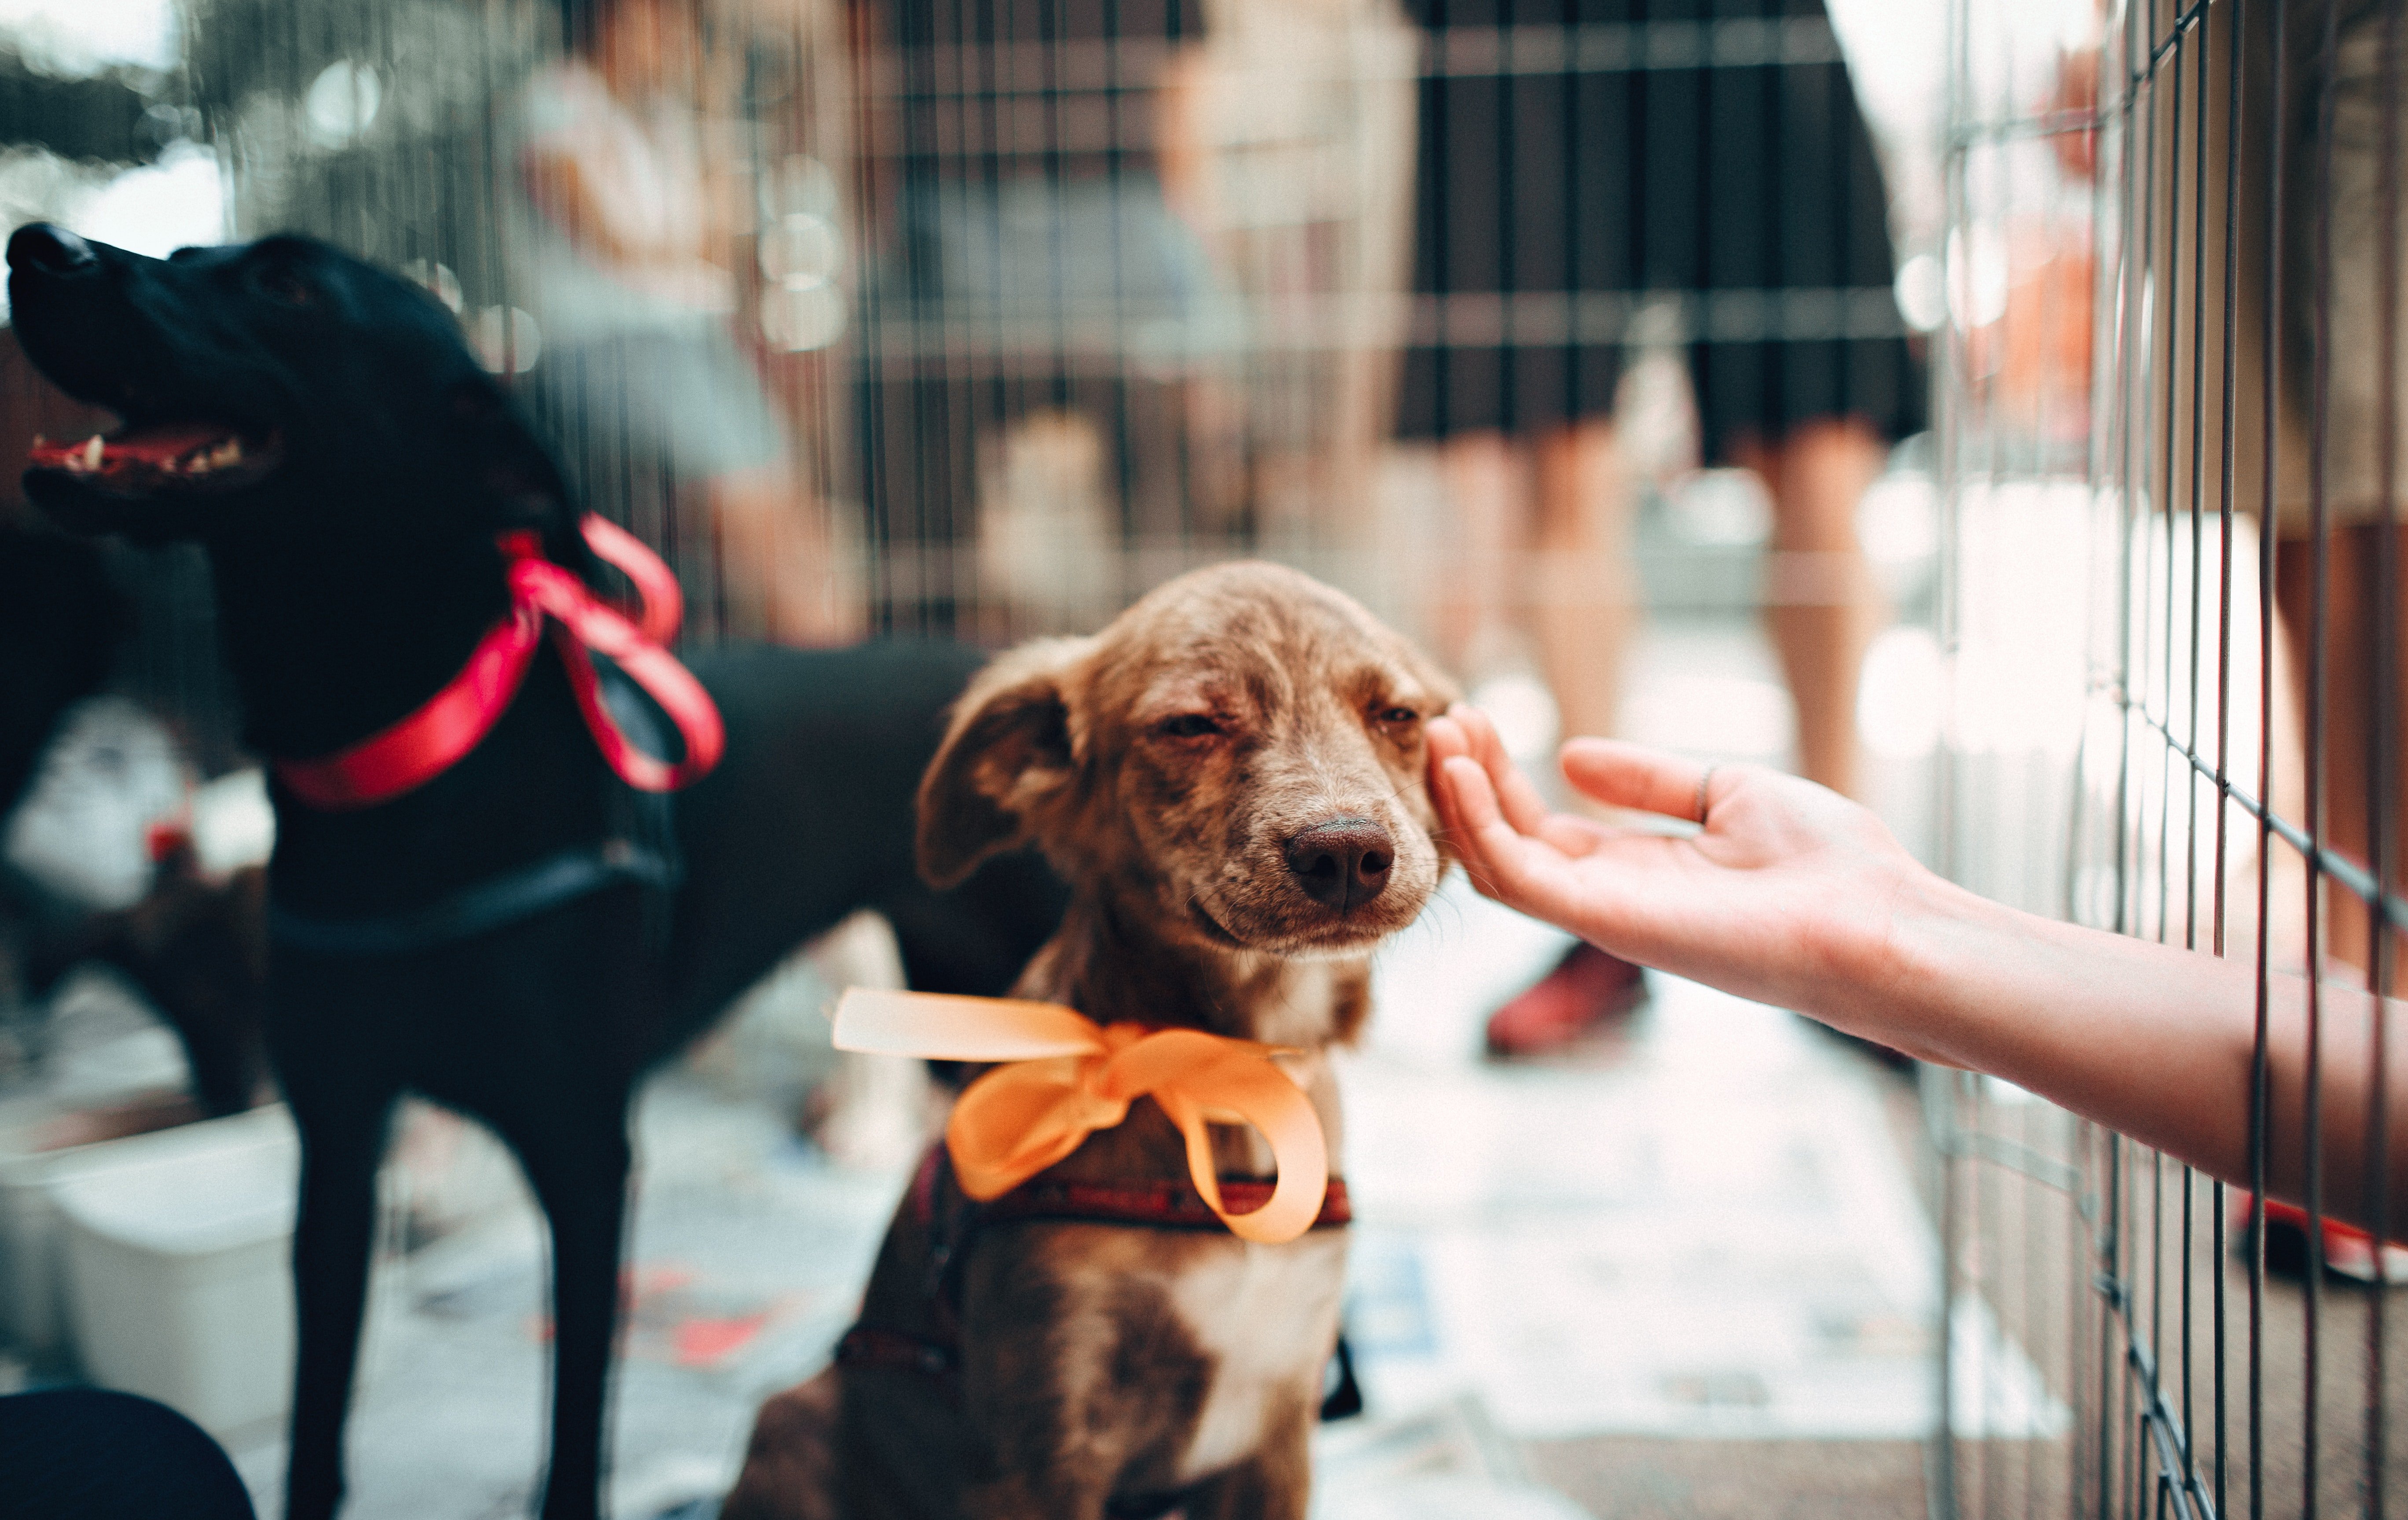 Puppies in a pet store. | Source: Pexels